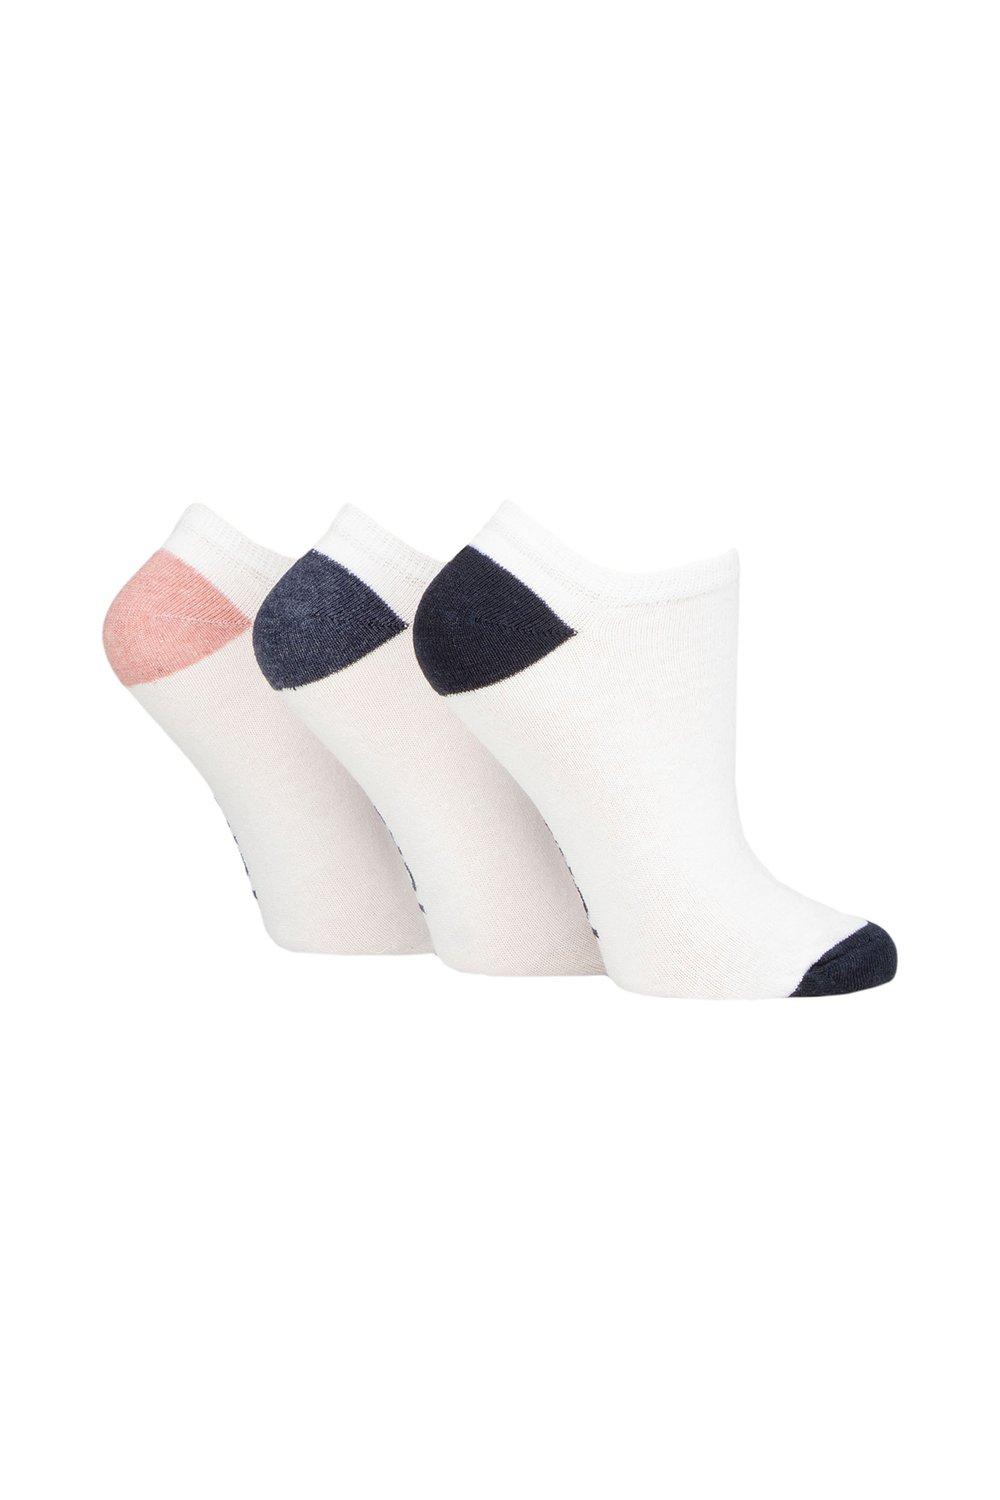 3 Pair 100% Recycled Heel and Toe Cotton Trainer Socks